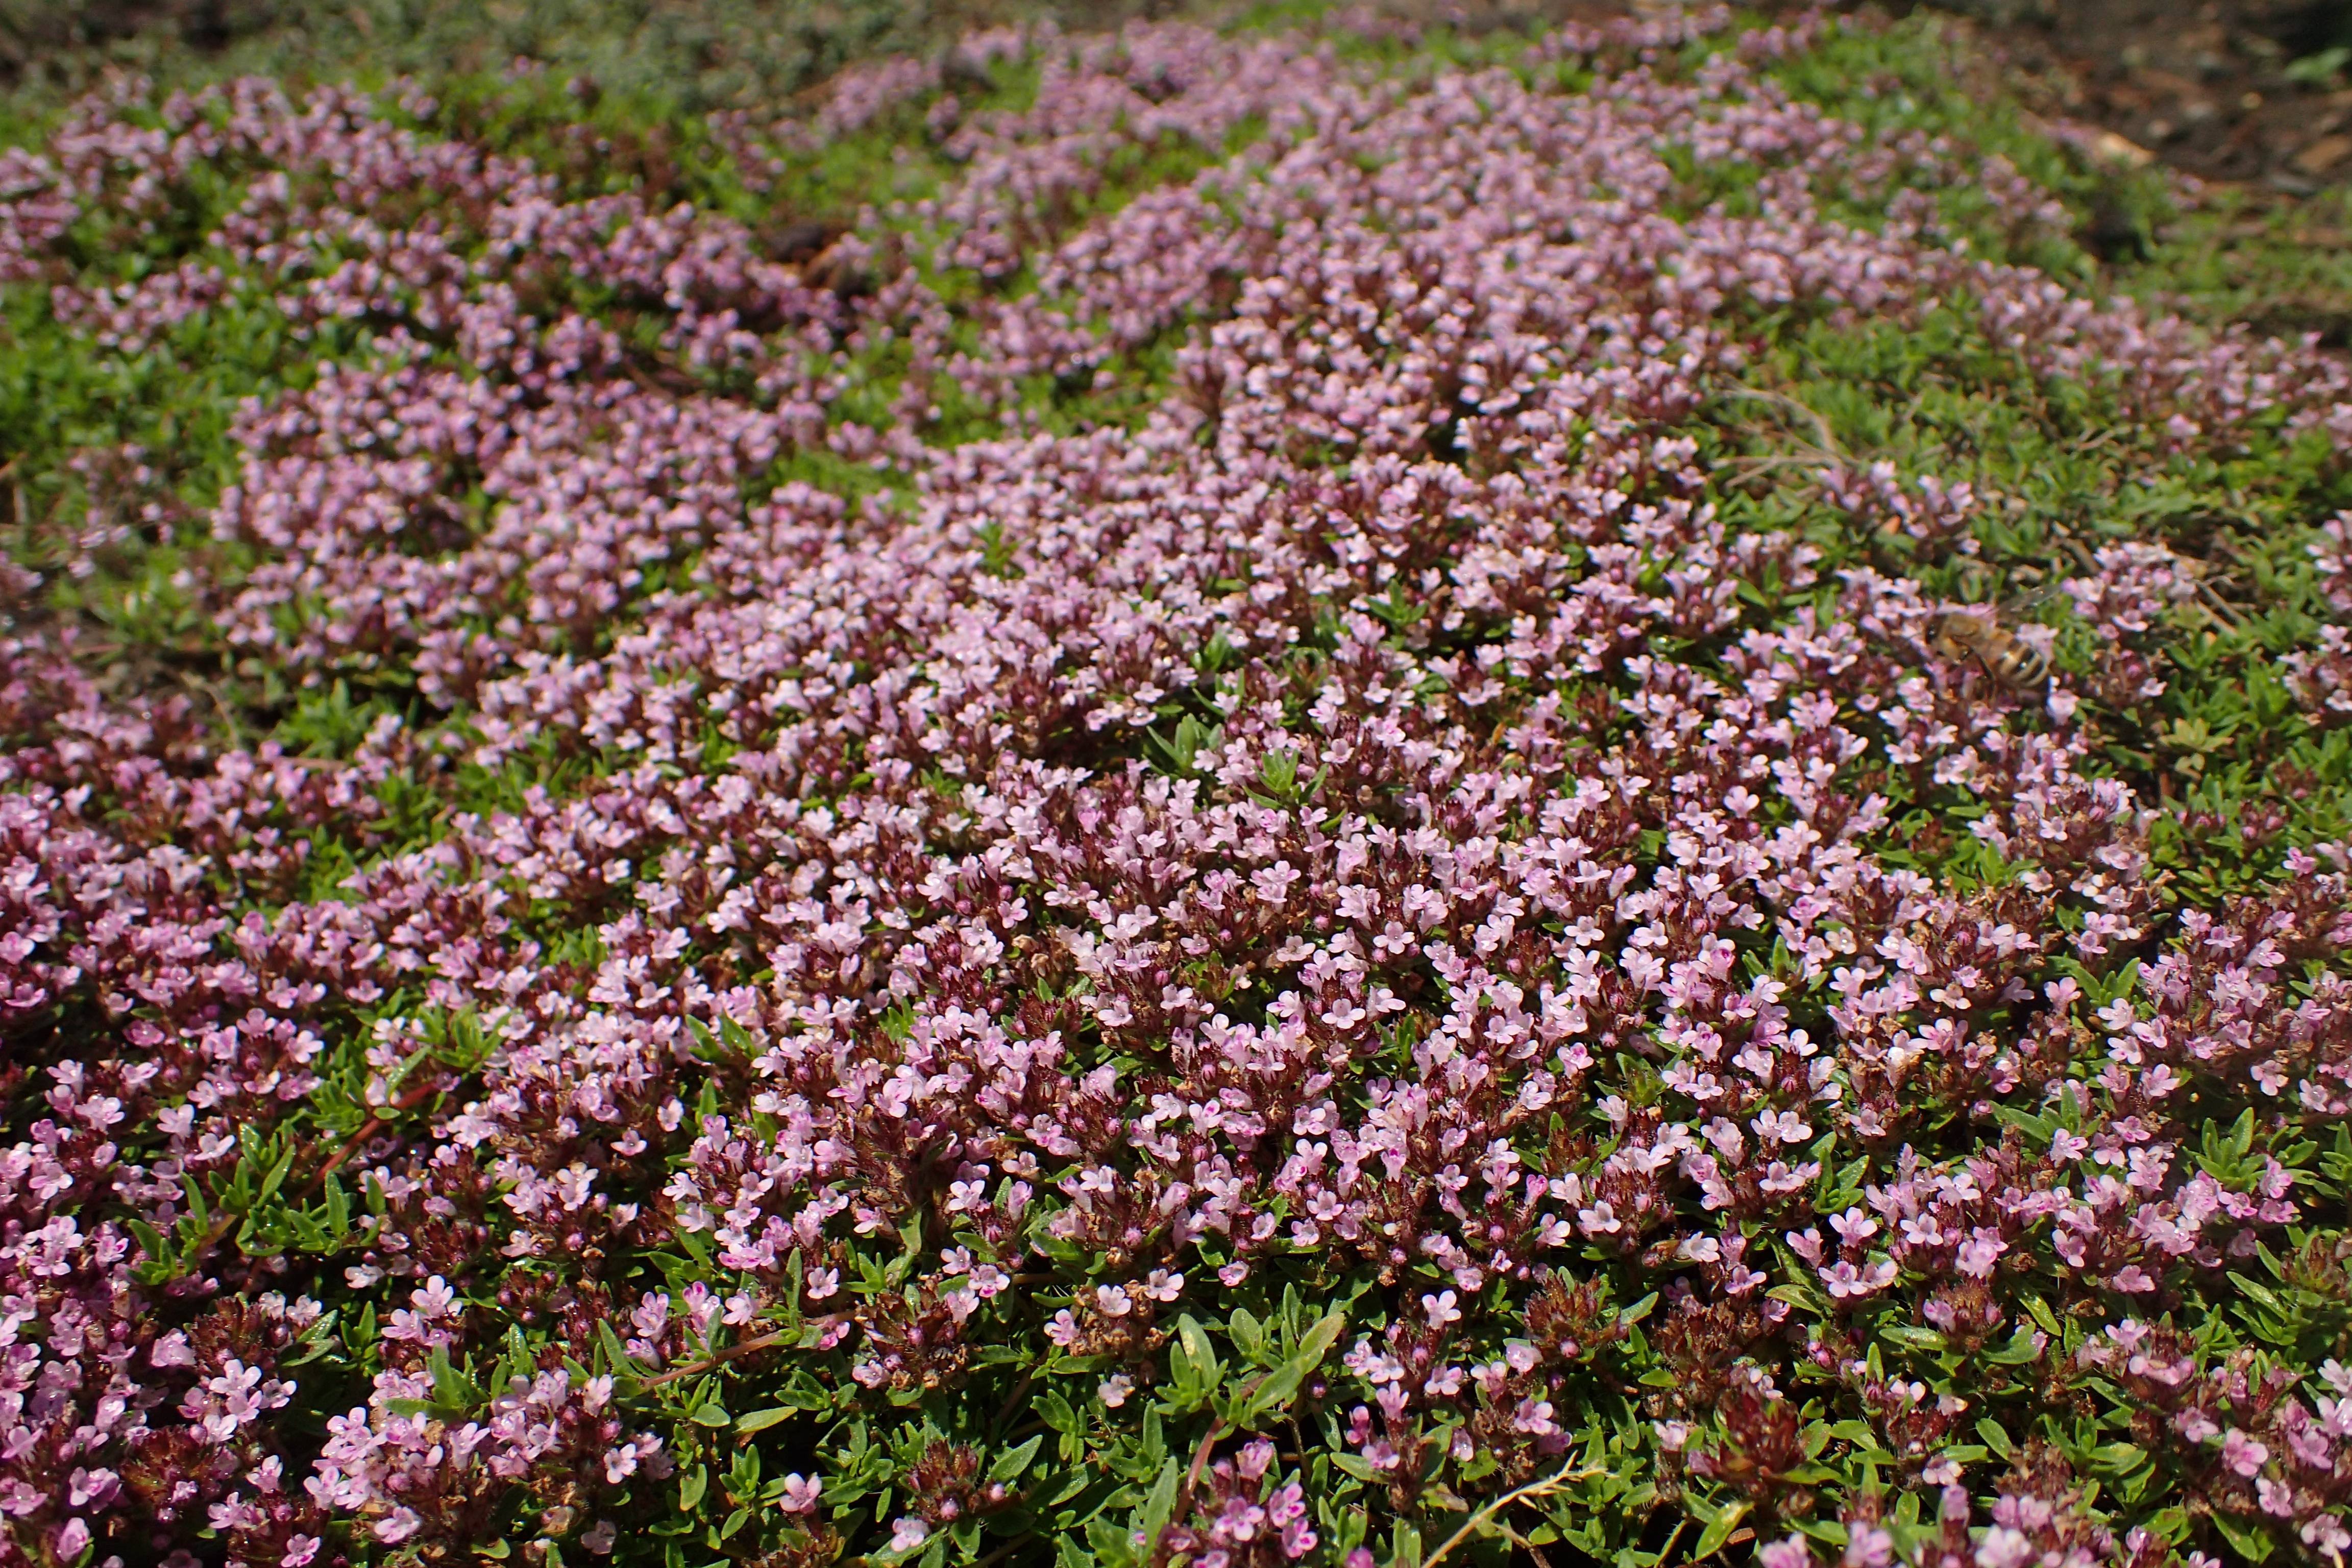 pink-brown flowers with green leaves and brown stems